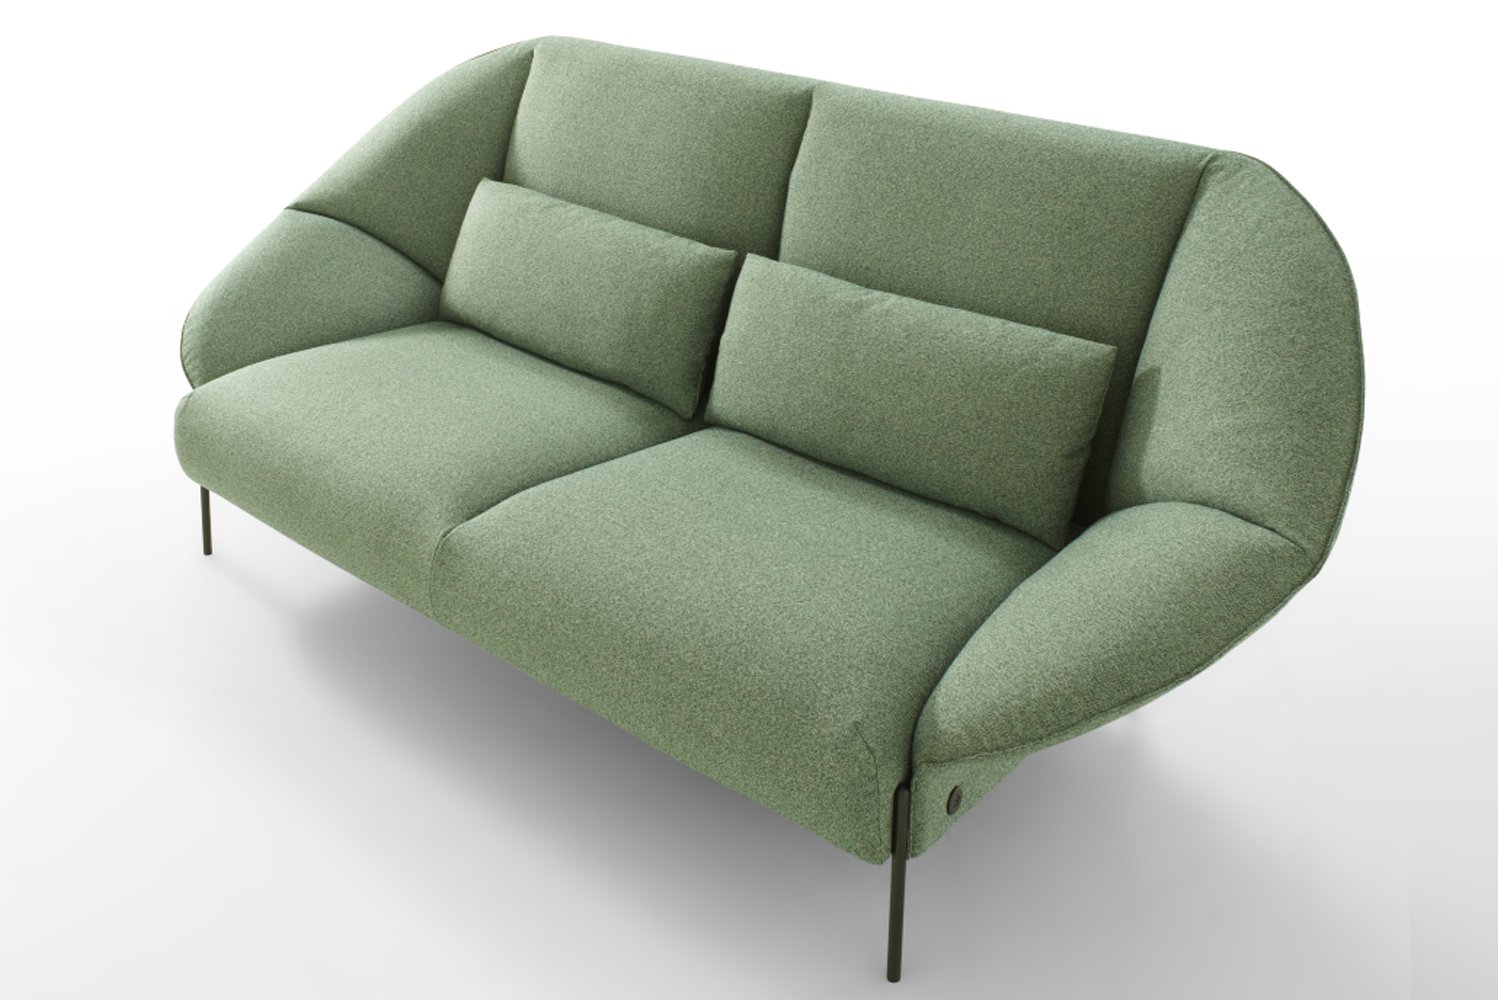 Introducing Papa by LucidiPevere for Ligne Roset 